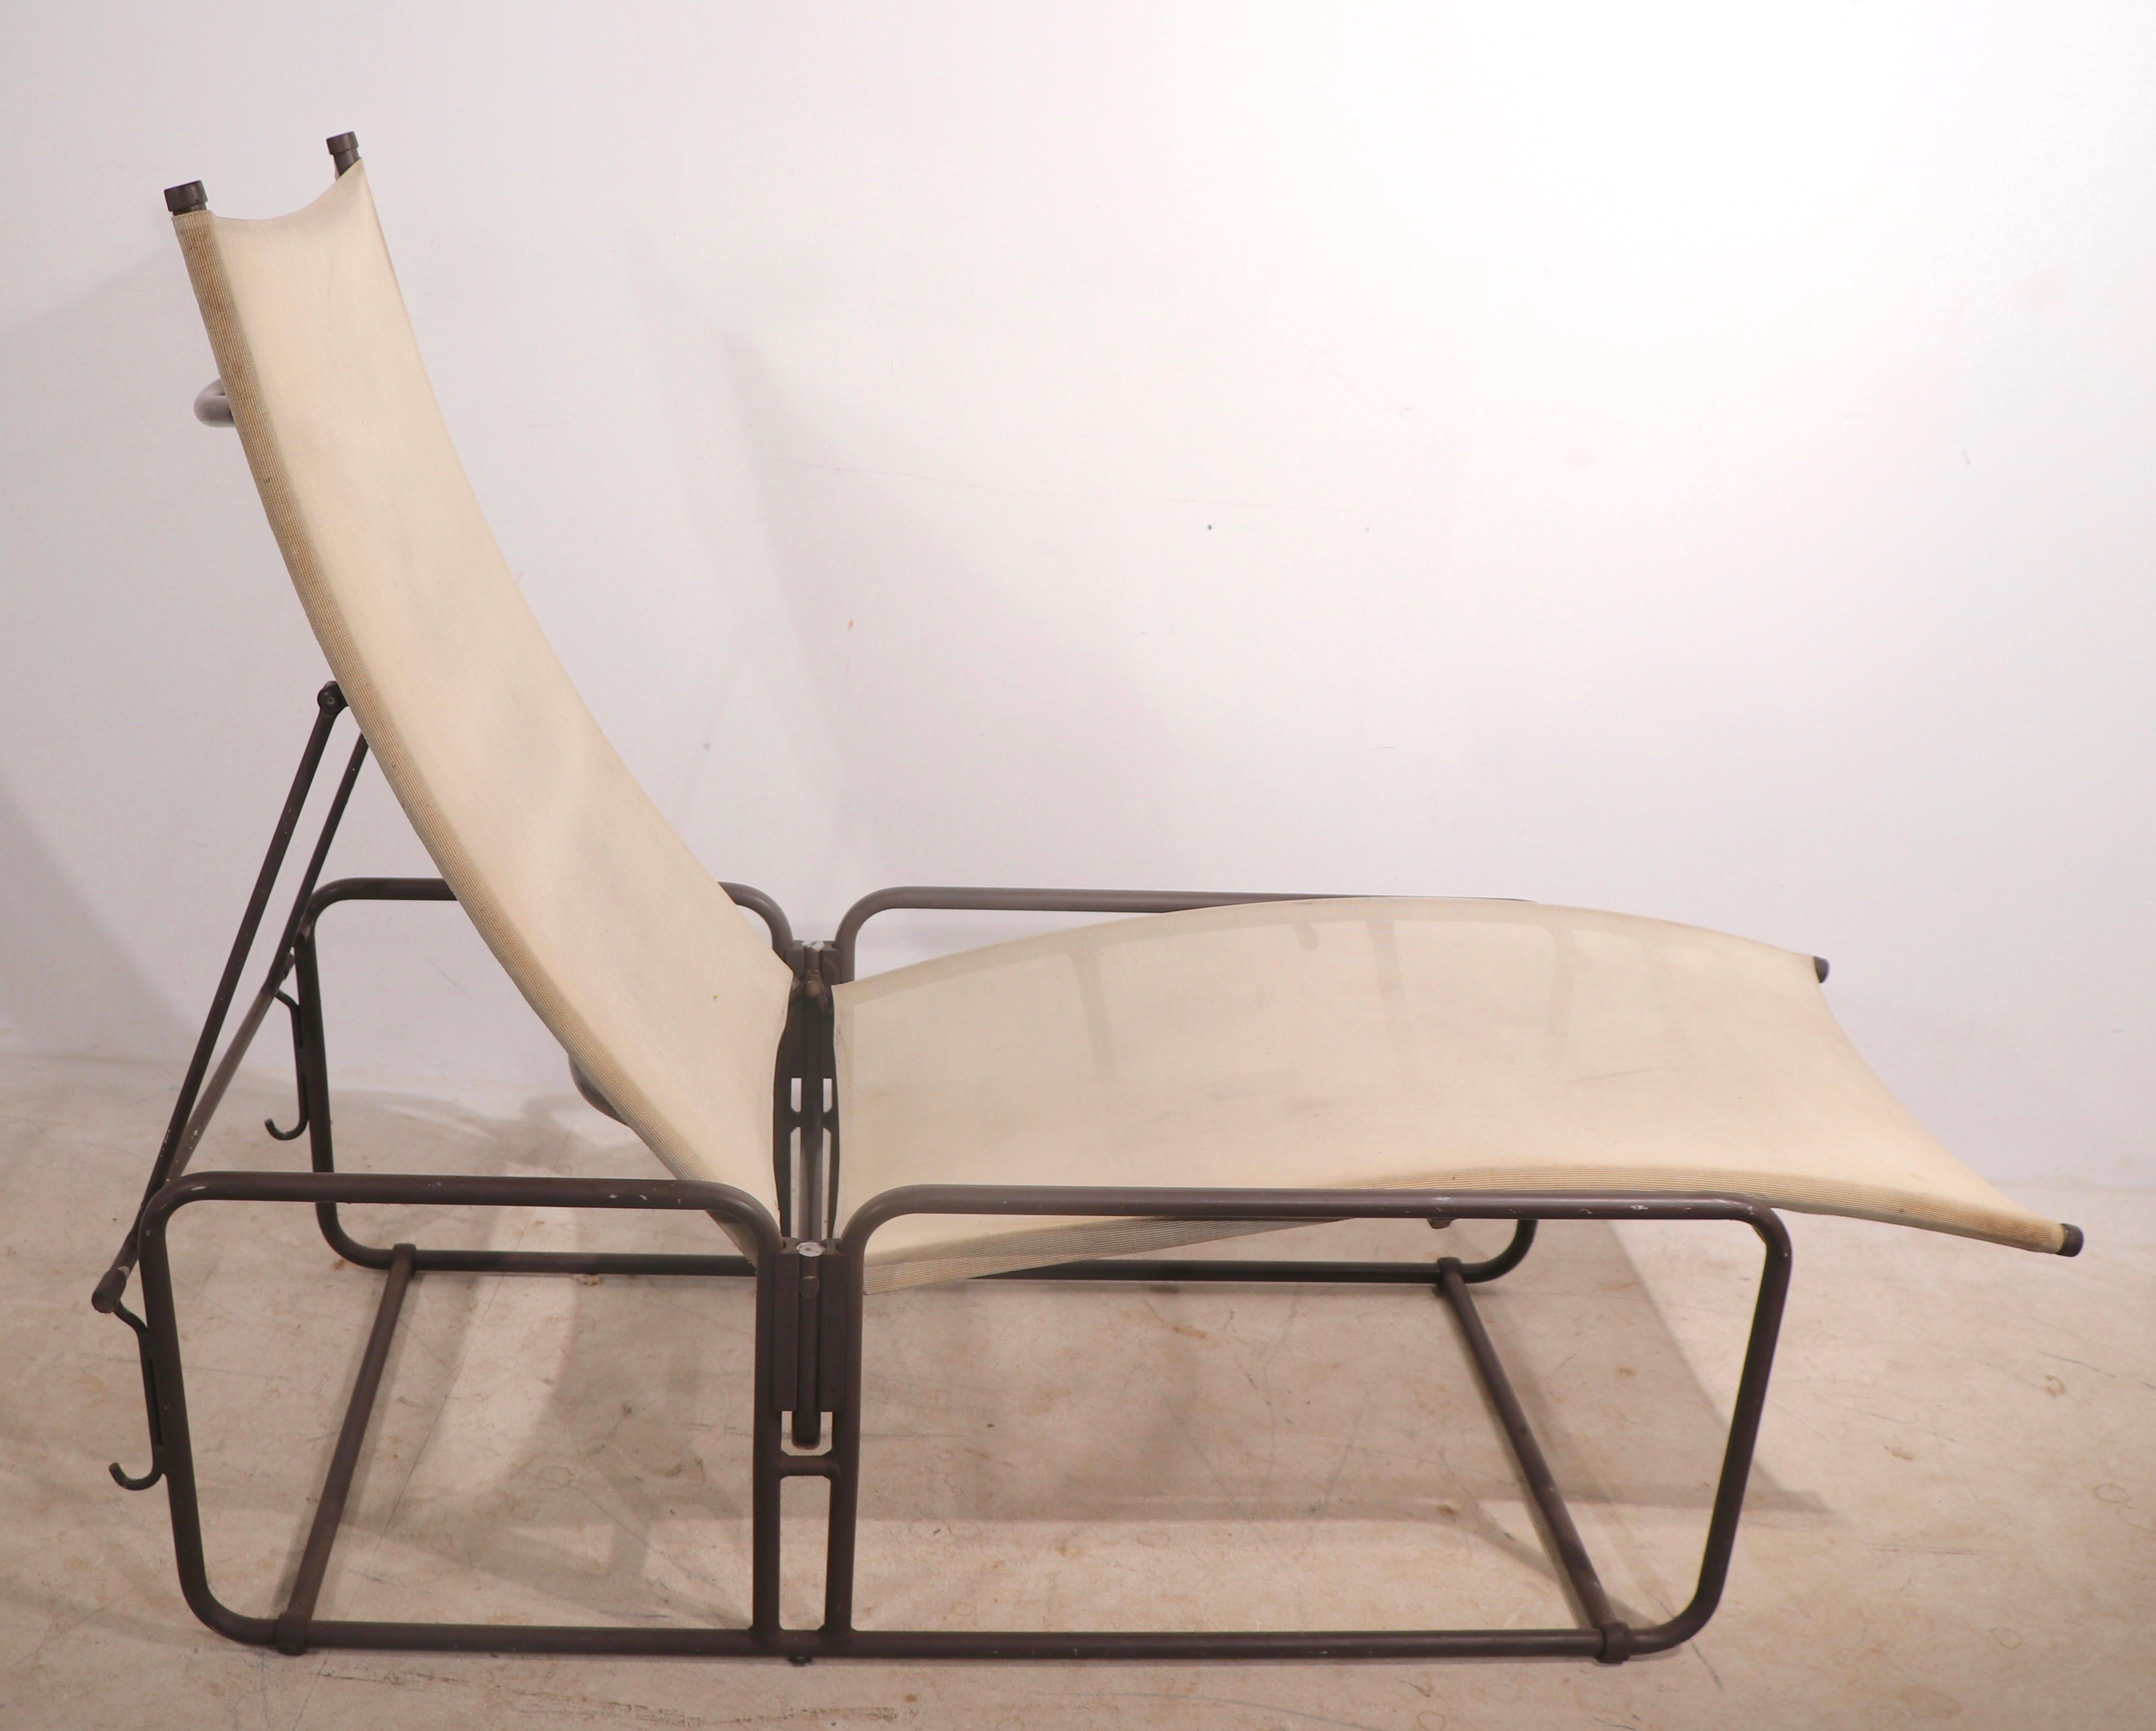 Classic 1970's California Modern style garden, patio, poolside, chaise lounge from the Nomad series by Brown Jordan. The chaise has a lightweight aluminum frame and sophisticated canvas sling seat and back. The back adjusts in position, upright and